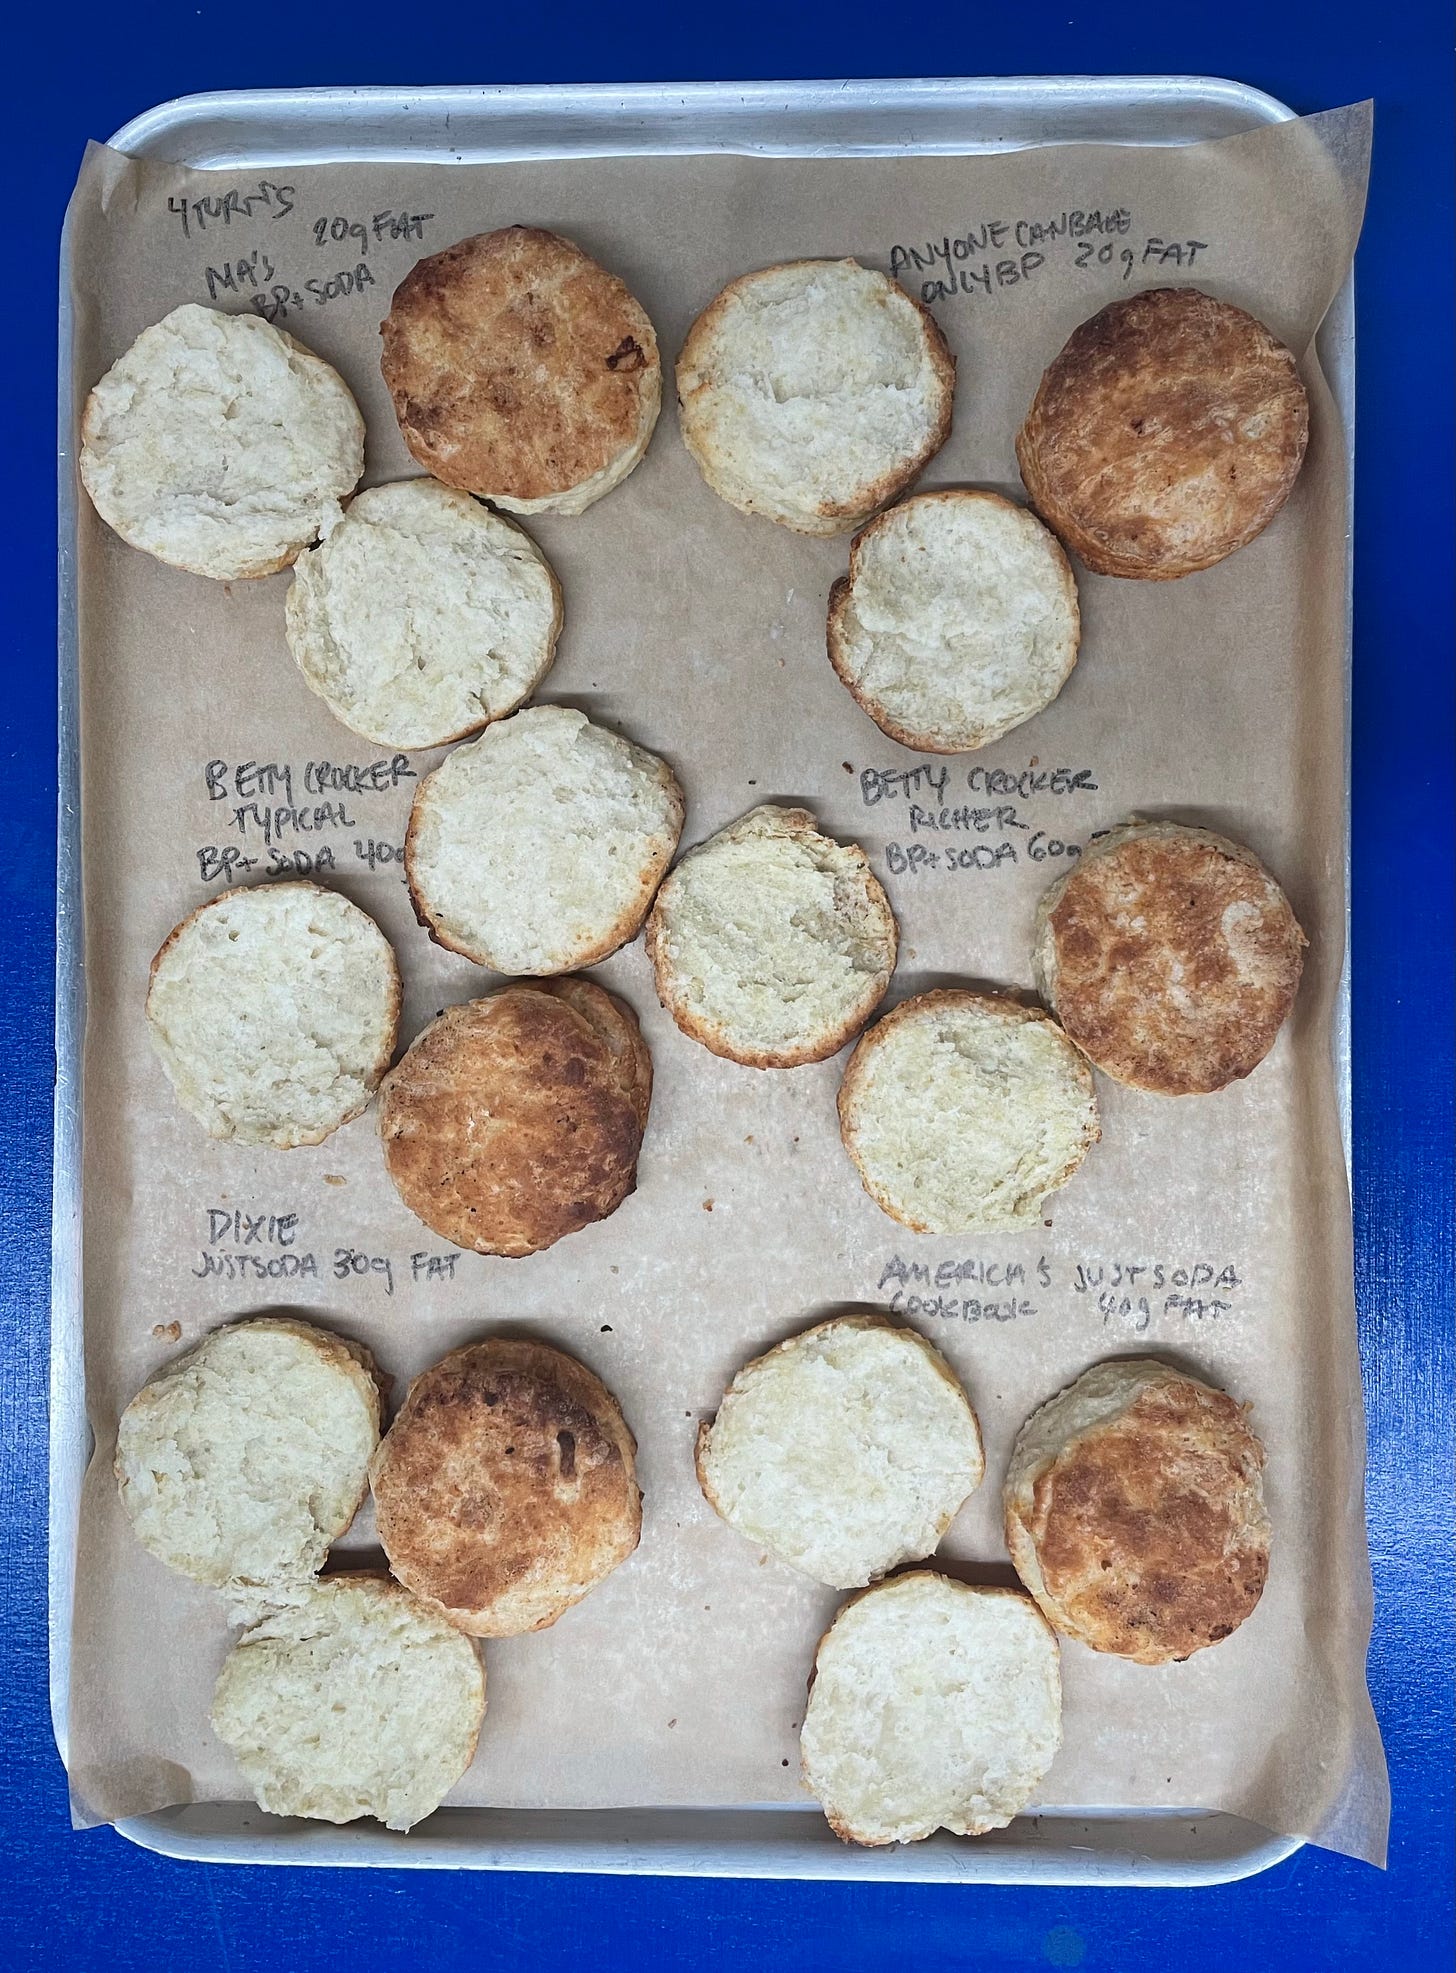 a tray of biscuits, some sliced, with notes written alongside them